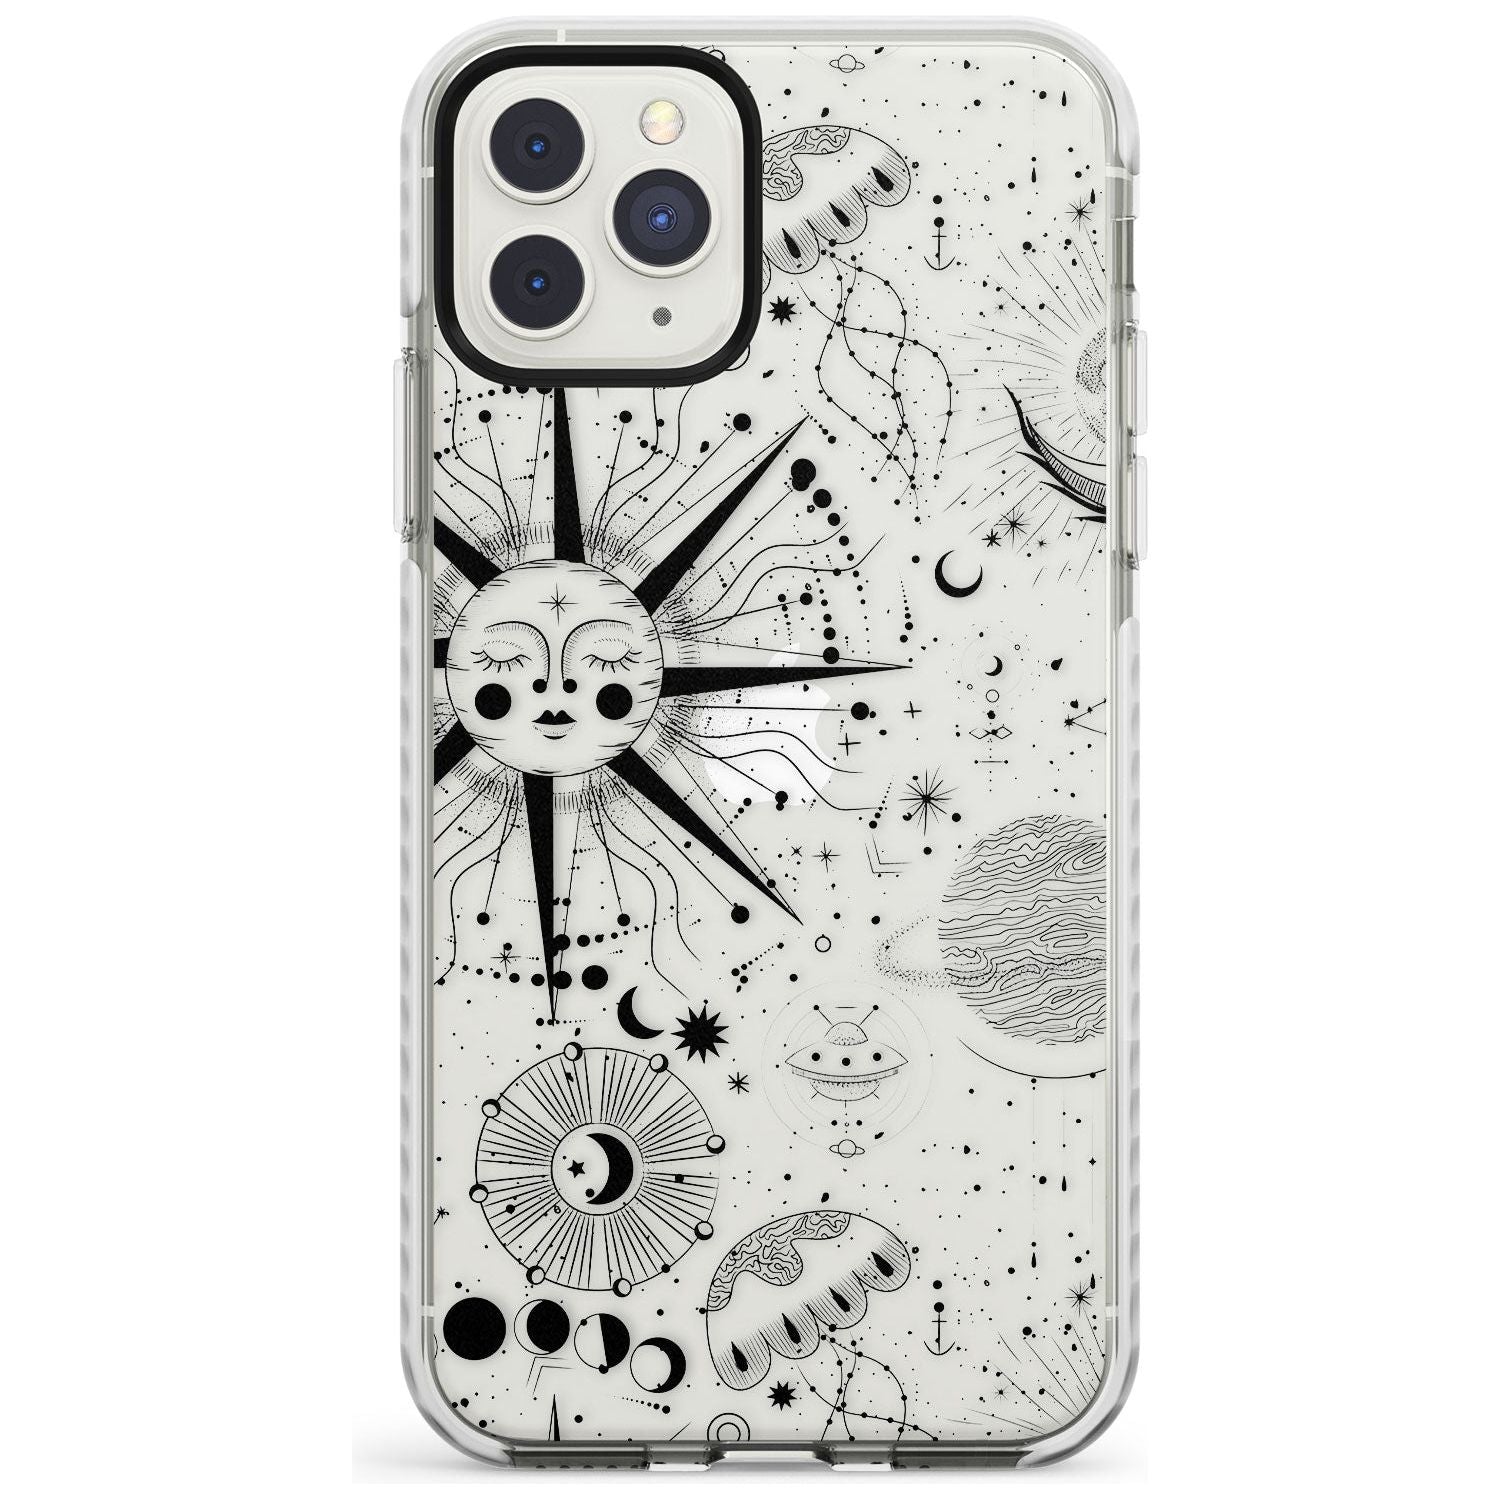 Large Sun Vintage Astrological Impact Phone Case for iPhone 11 Pro Max